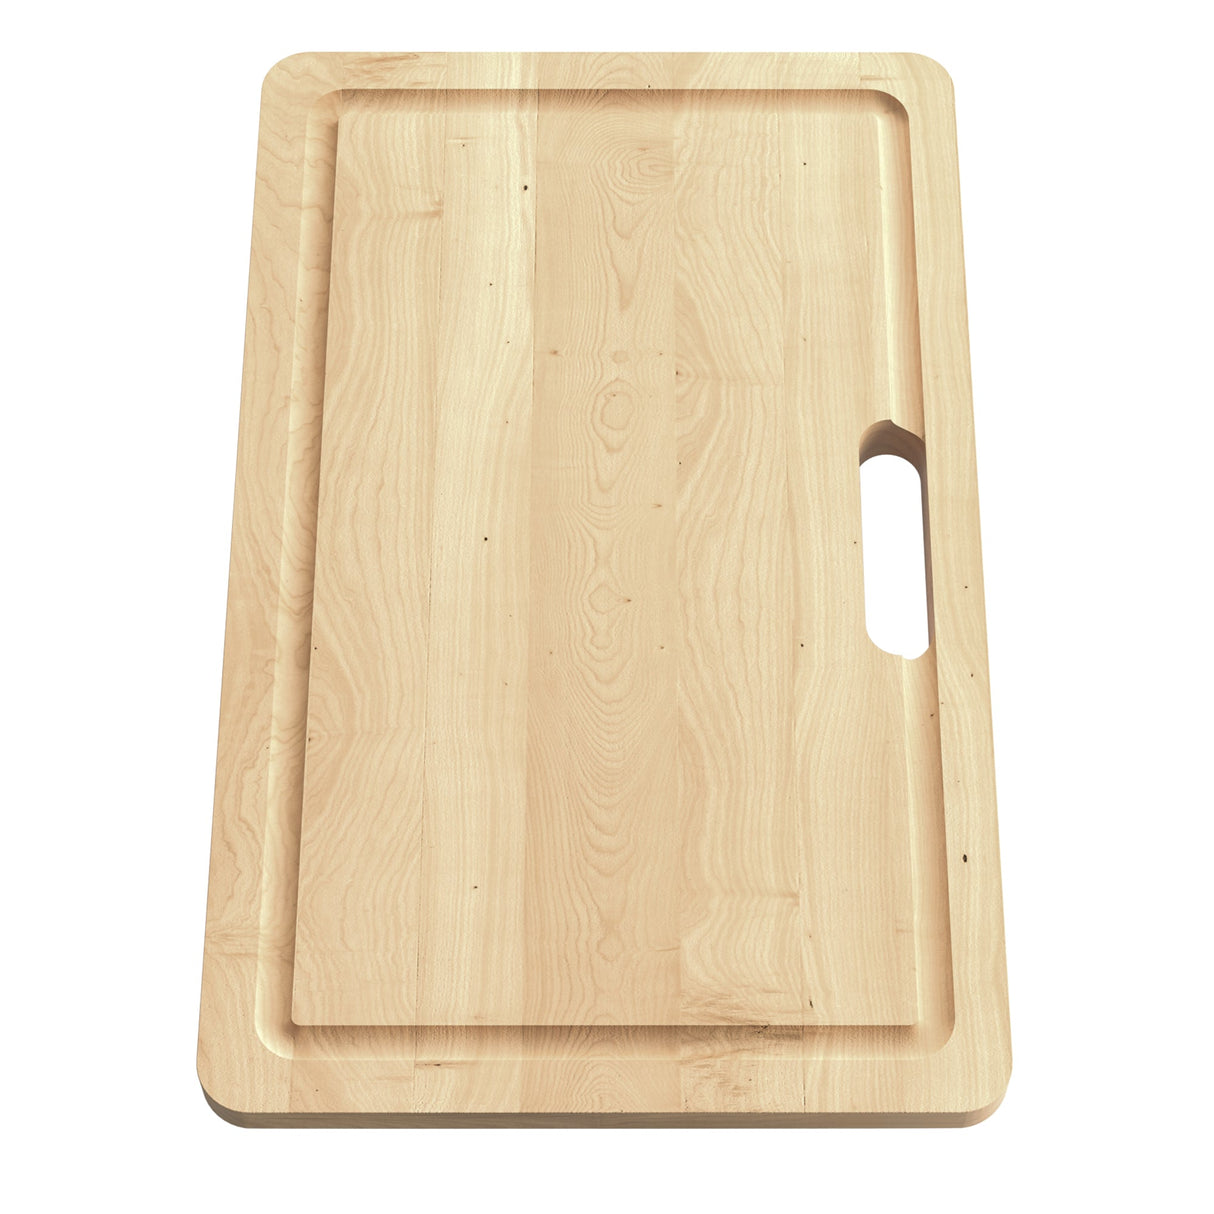 FRANKE PS2-45S 11.0-in. x 17.9-in. Solid Wood Cutting Board for Professional 2.0 Series Sinks